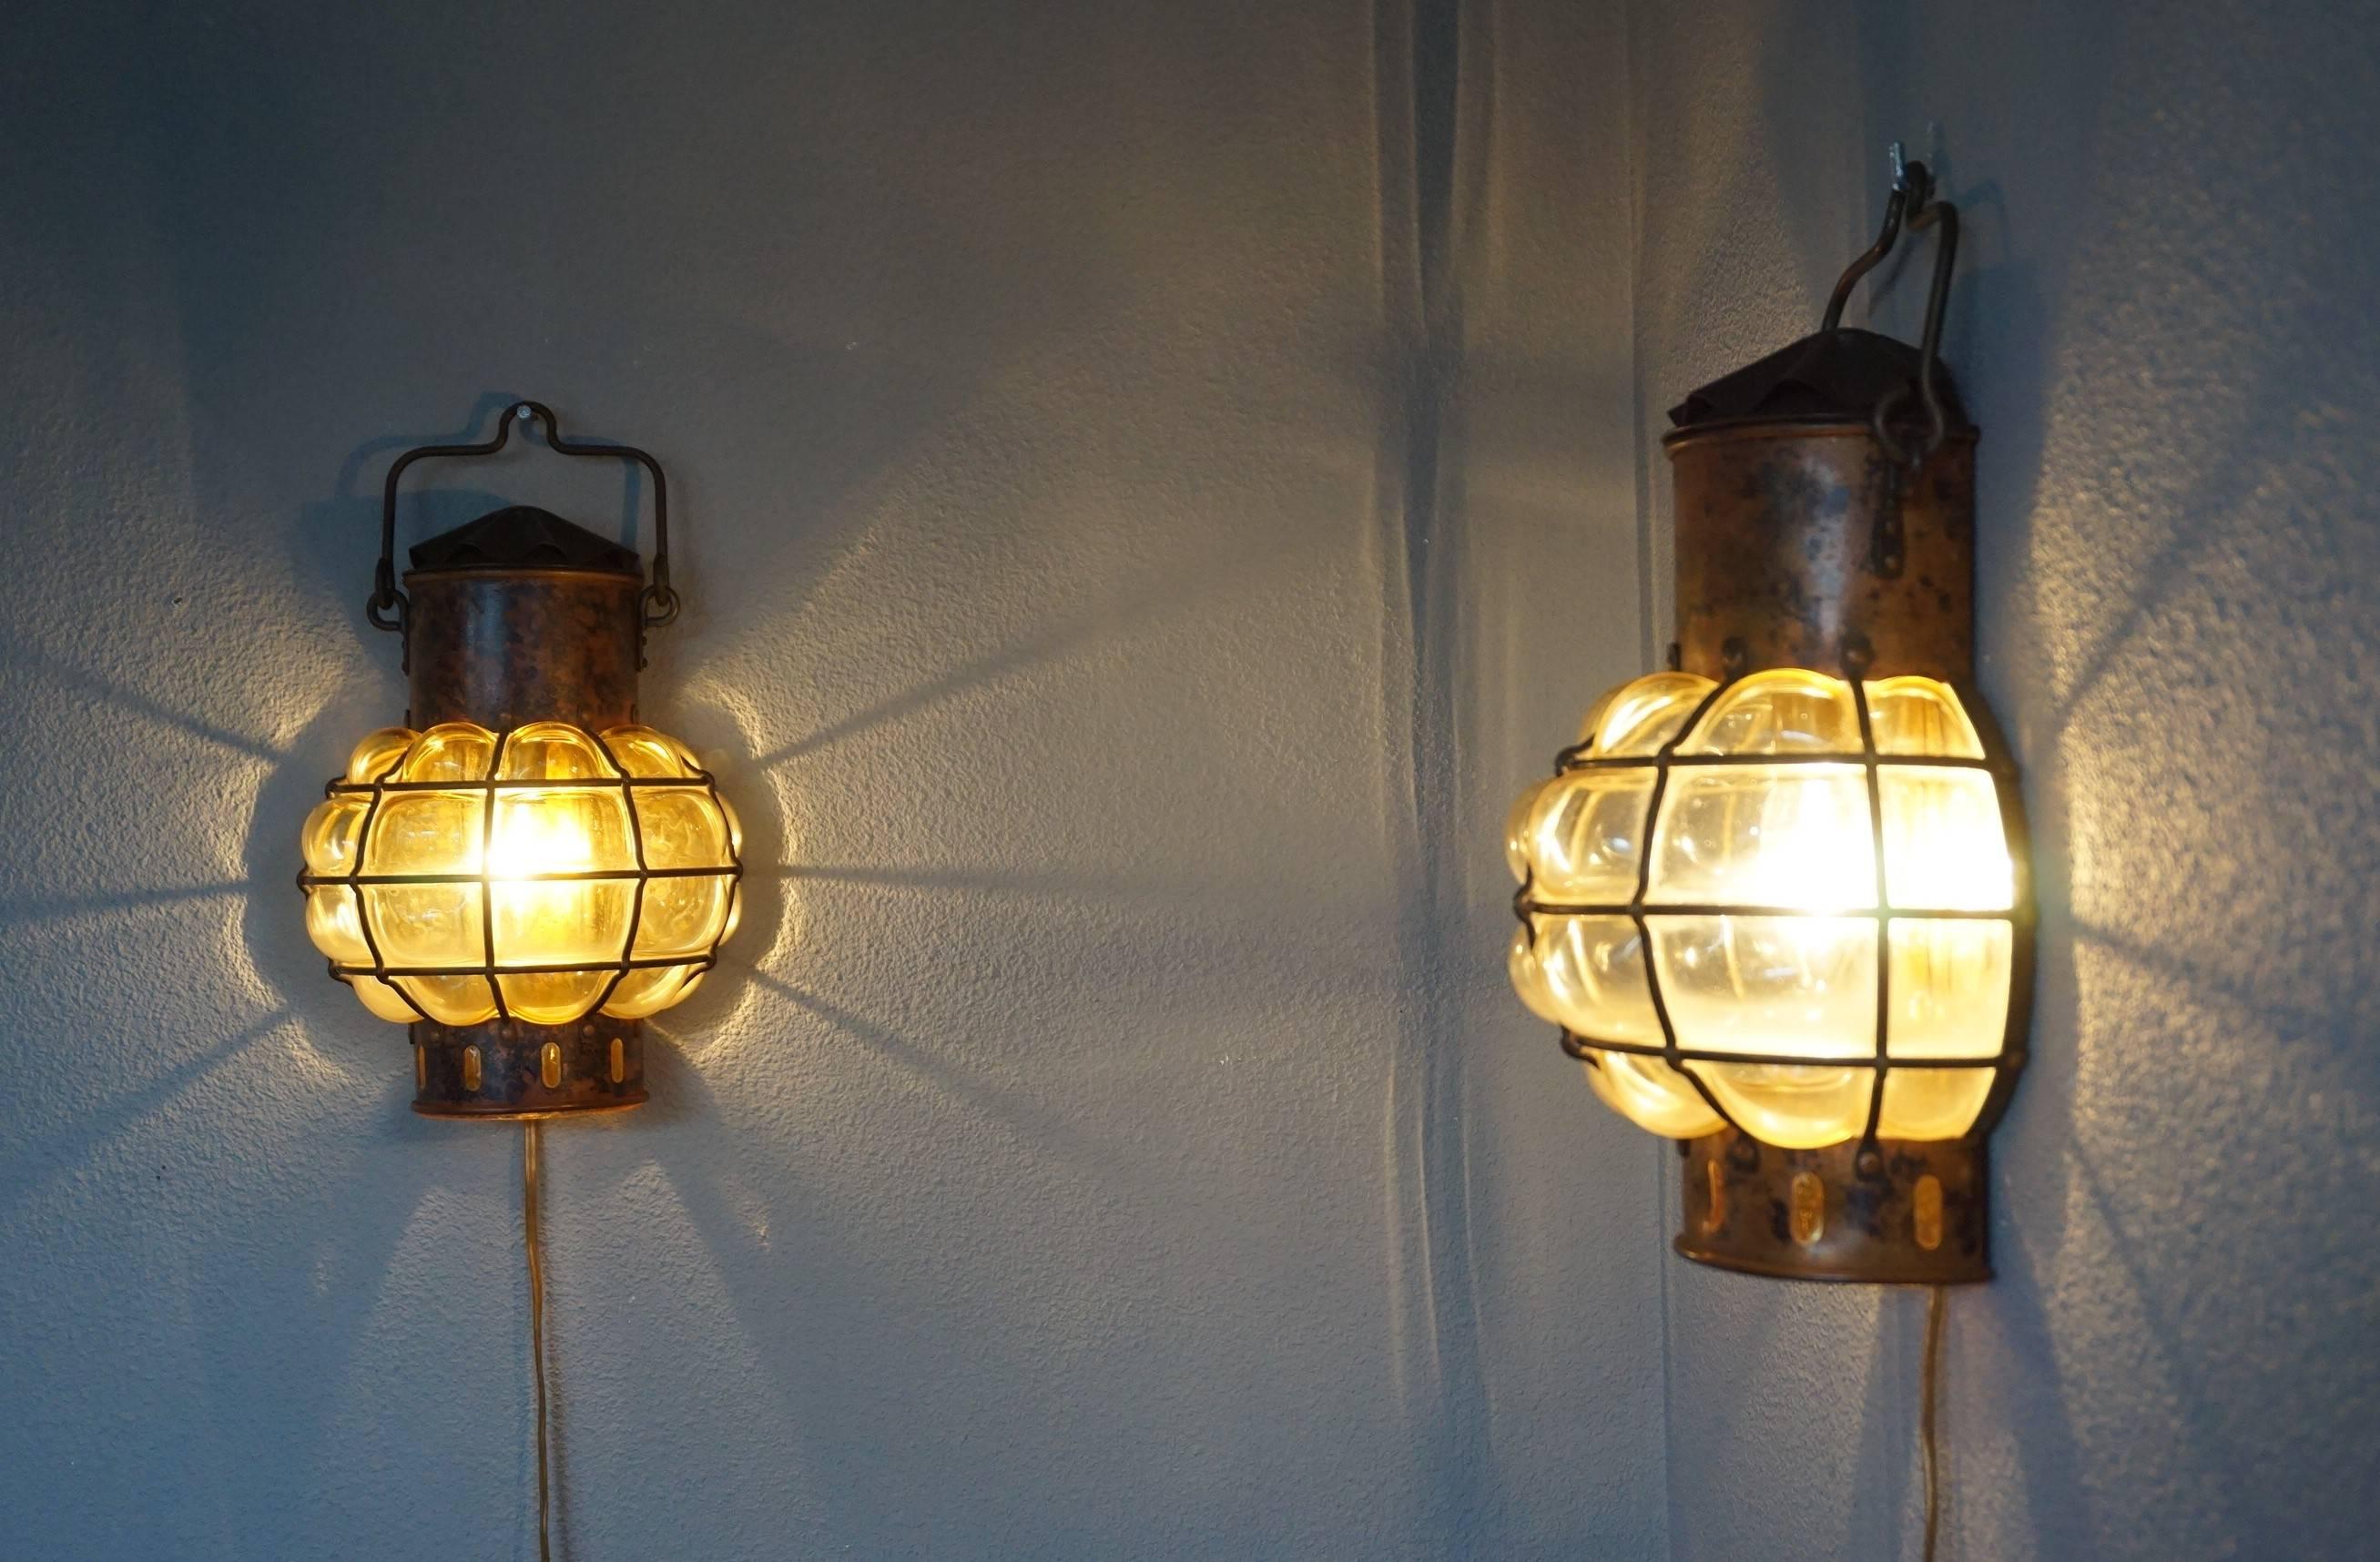 Vintage & rare, nautical design wall lights.

These quality crafted wall lamps designed after antique ships lanterns are in excellent condition. If you are decorating a home or a business (for example a restaurant) with a nautical theme then these